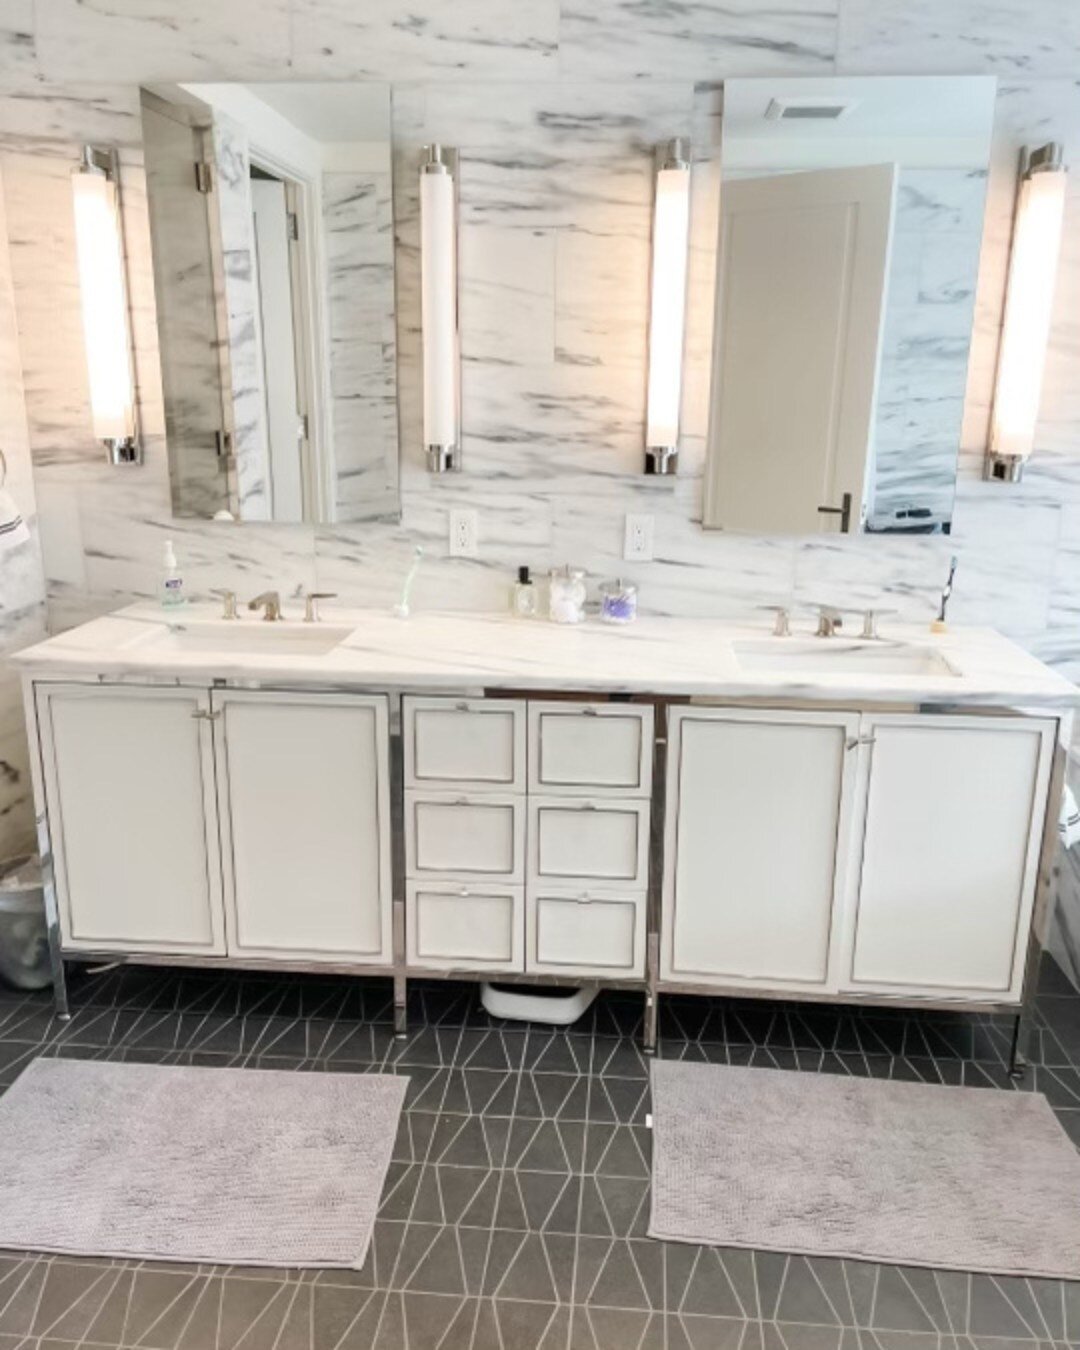 We love an organized bathroom! 😍 Having an organized bathroom can help speed things up in the morning and it&rsquo;s a much more relaxing way to start or end your day! 

Tips to organize your bathroom ⬇️
✨Declutter first! Getting organized always st